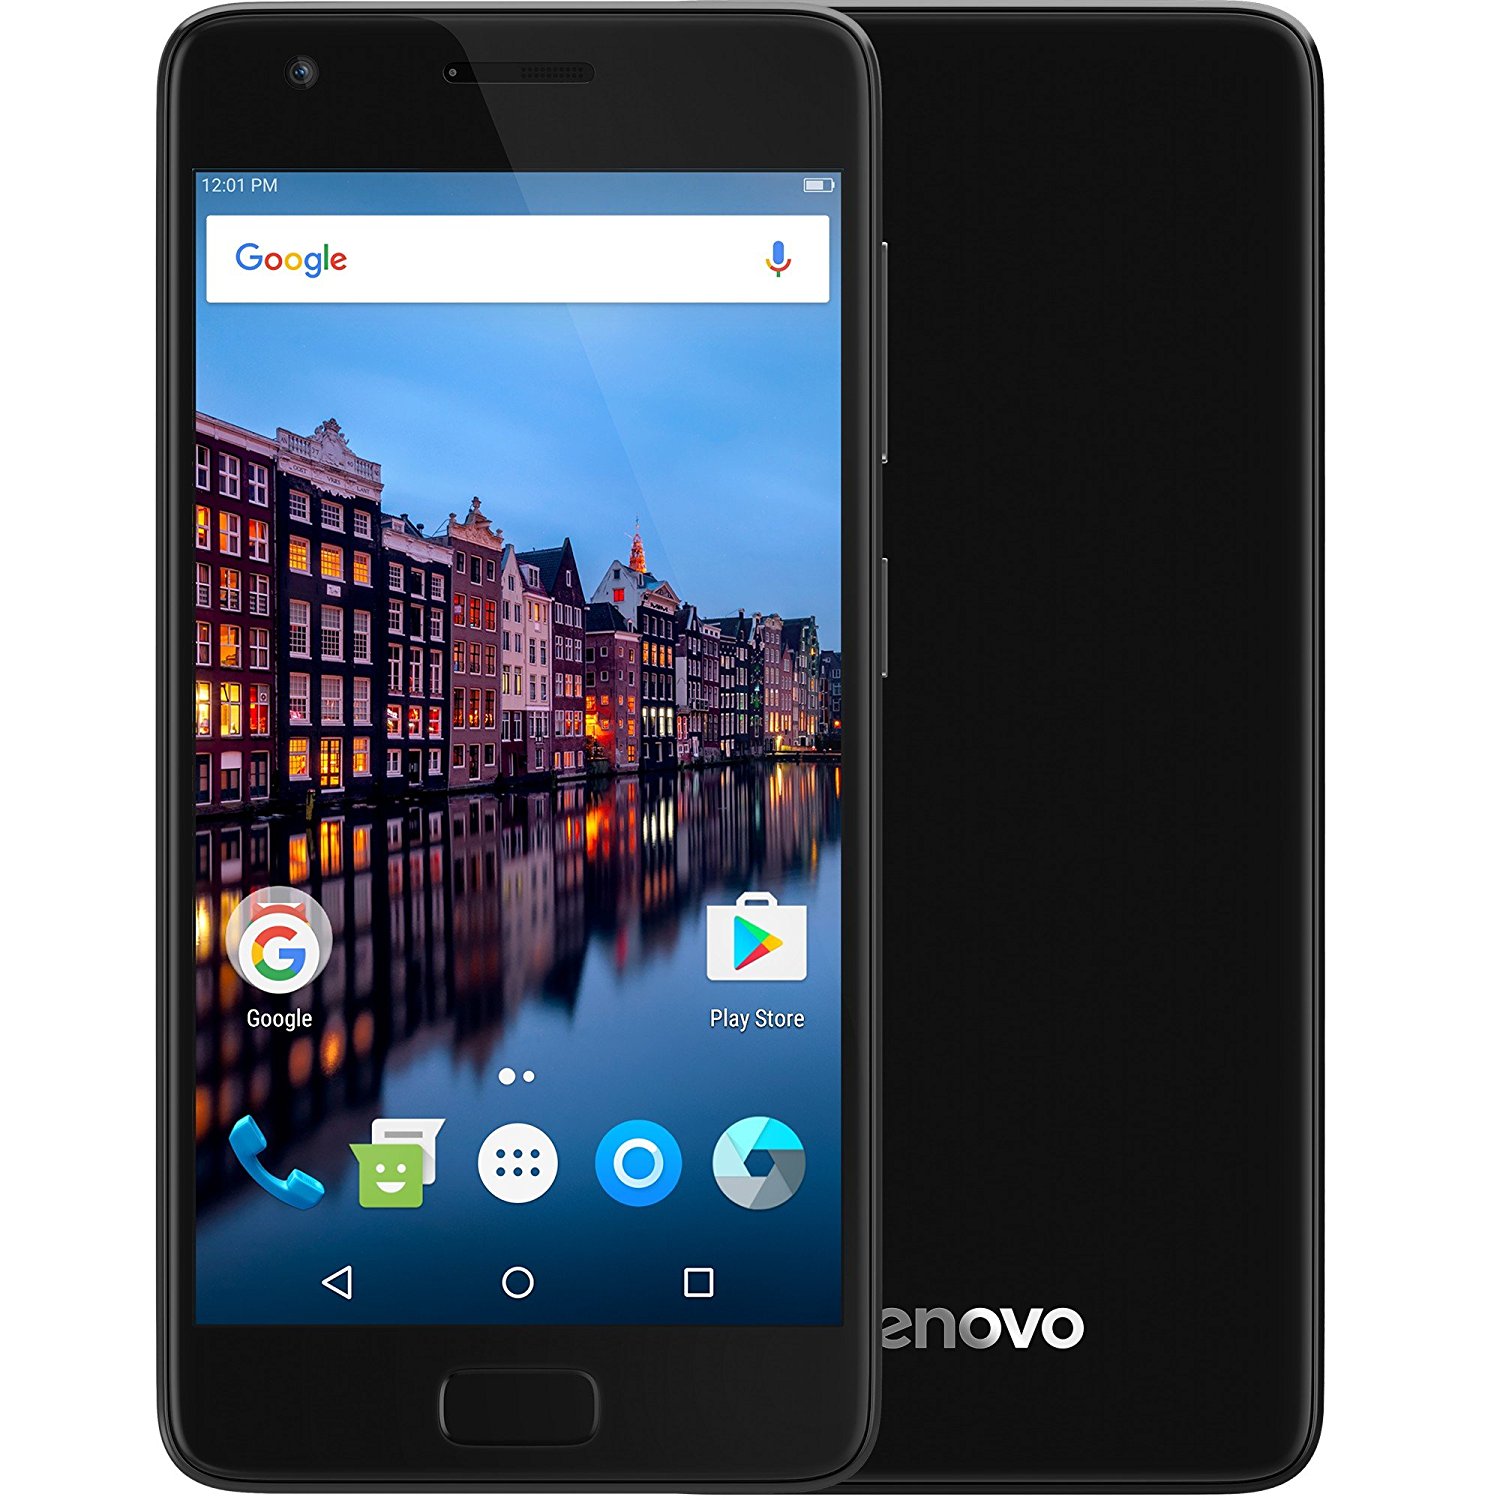 Lenovo Z2 Plus Smartphone with 4GB RAM, 64GB Internal Memory and 4G LTE Connectivity